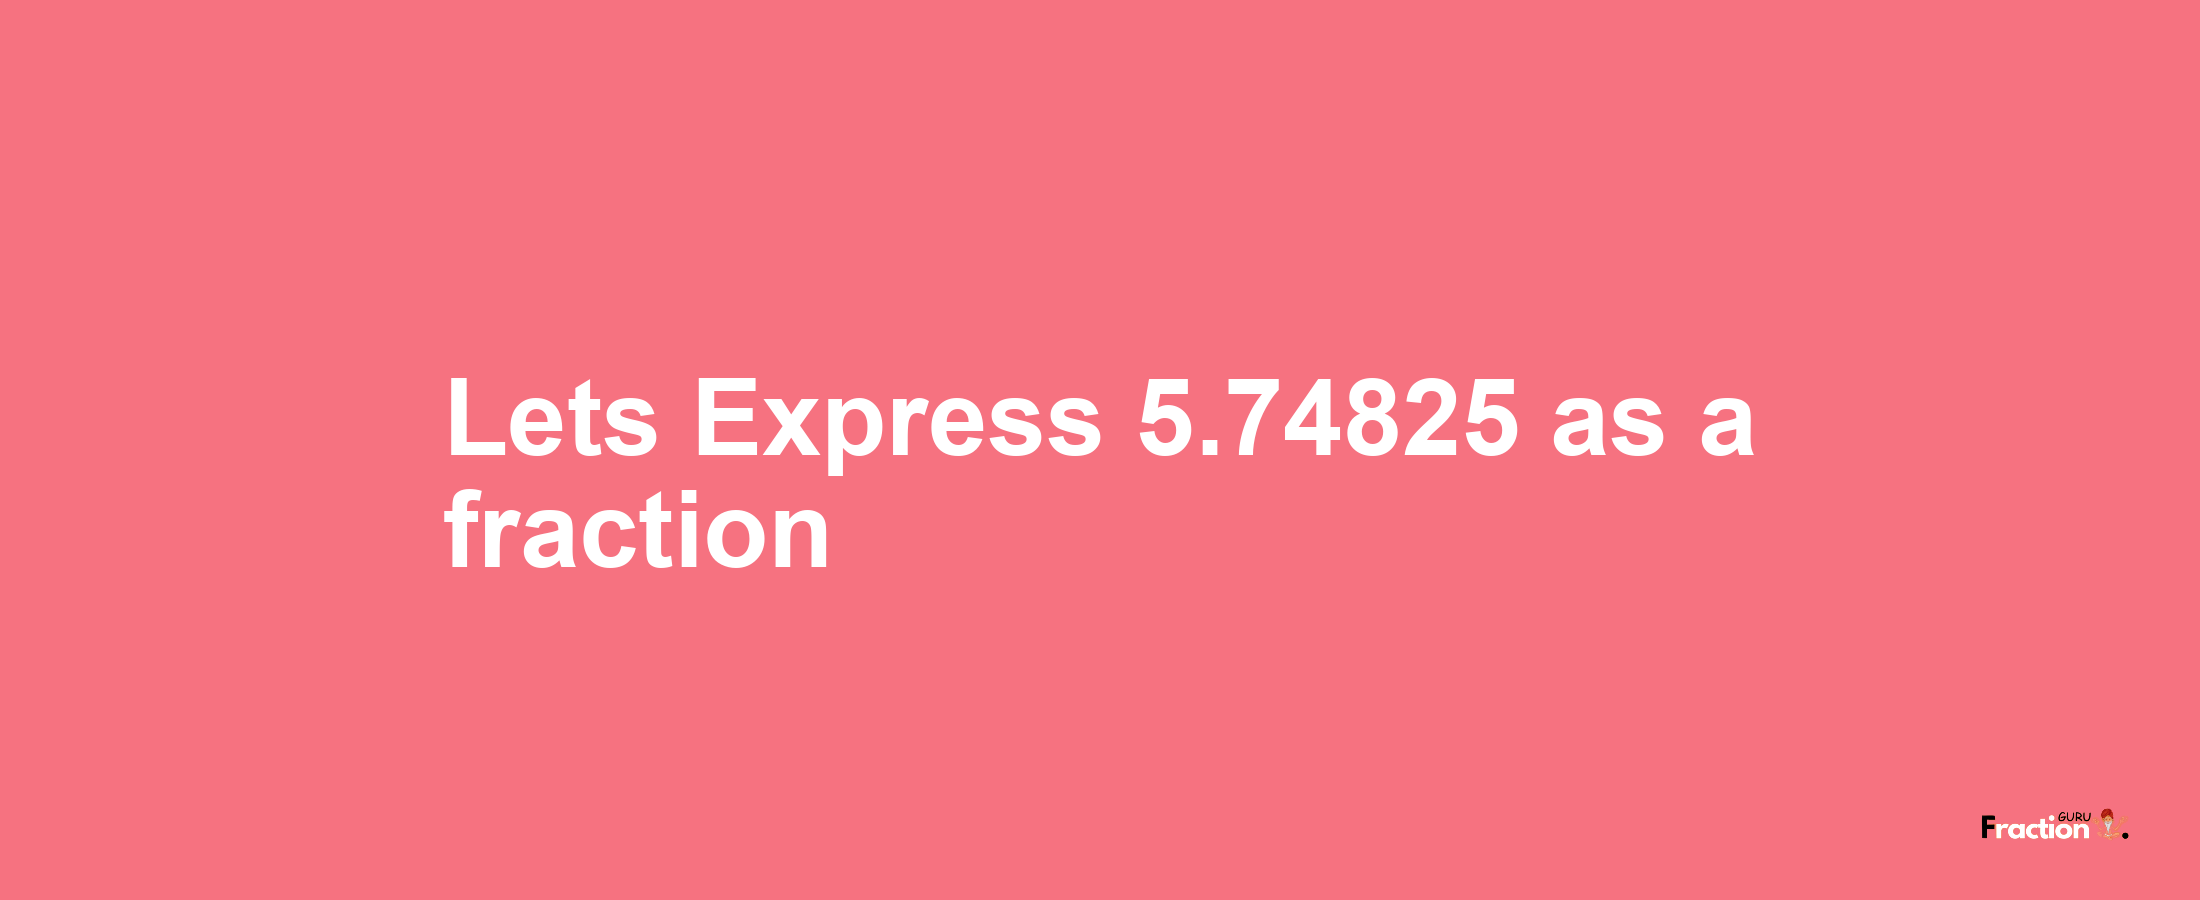 Lets Express 5.74825 as afraction